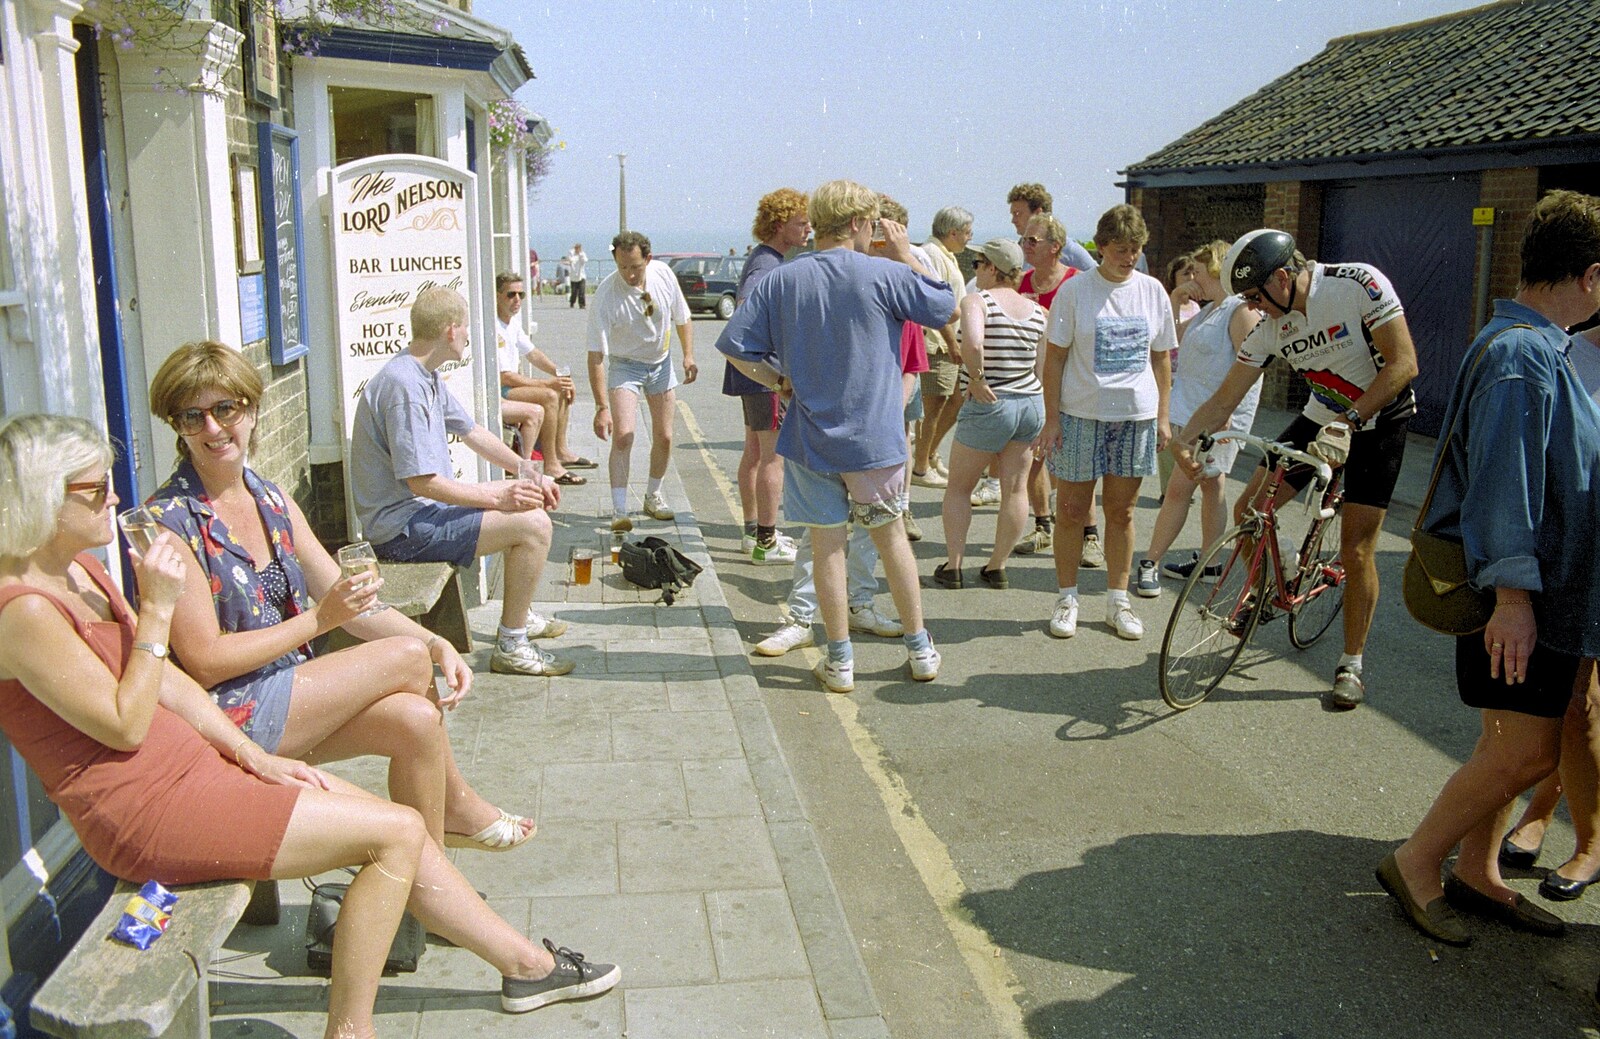 The scene outside the Lord Nelson from The First BSCC Bike Ride to Southwold, Suffolk - 10th June 1996